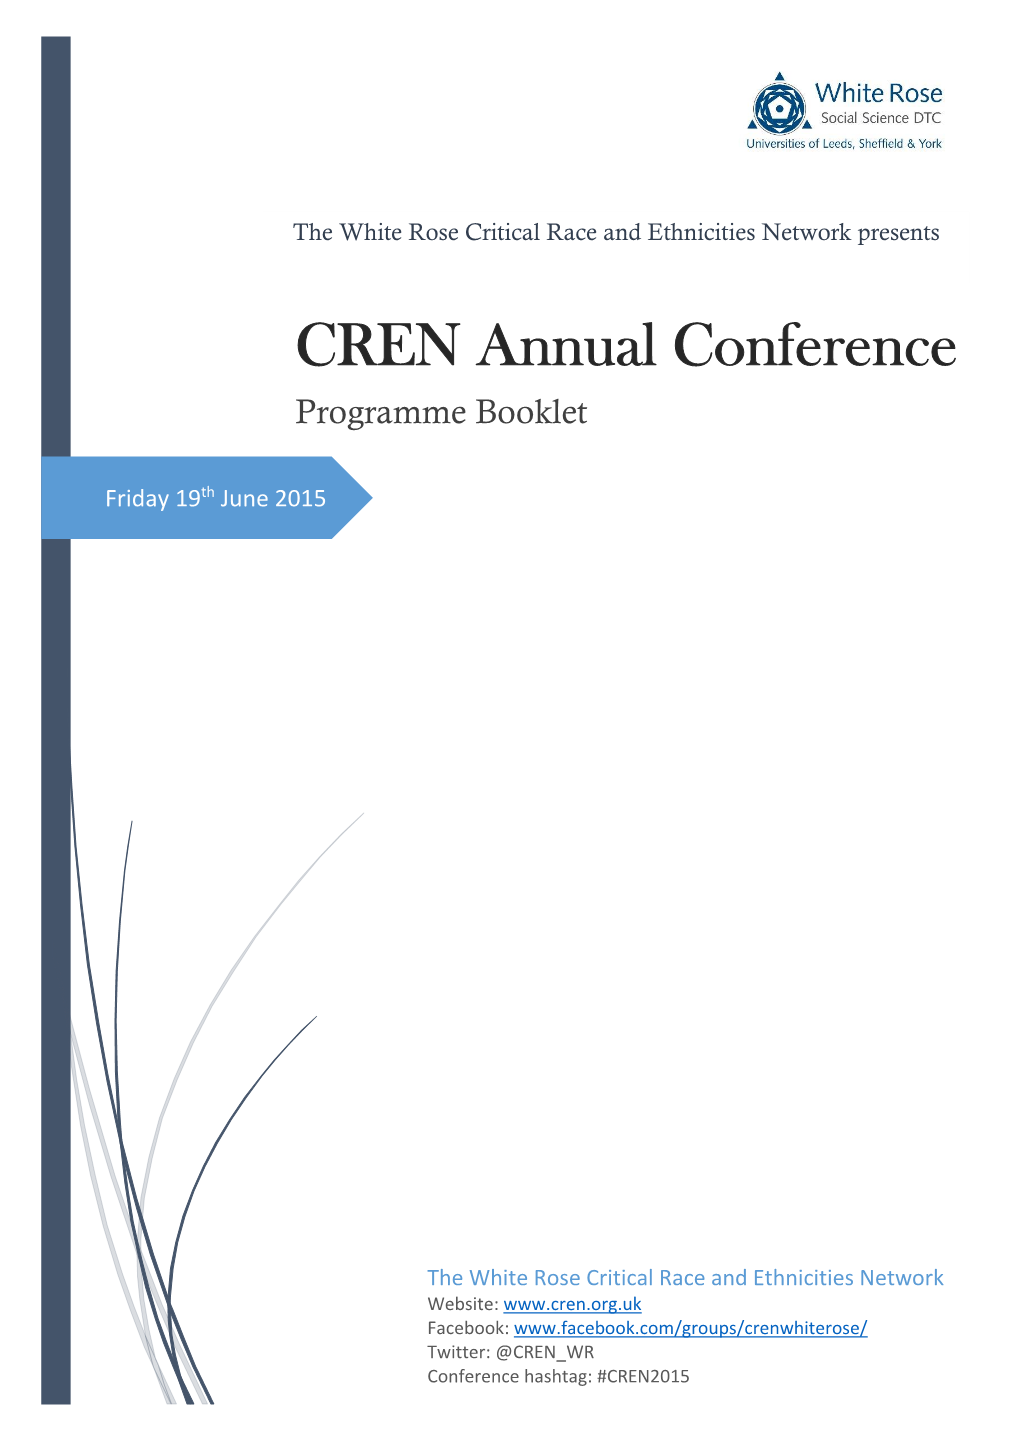 CREN Annual Conference Programme Booklet